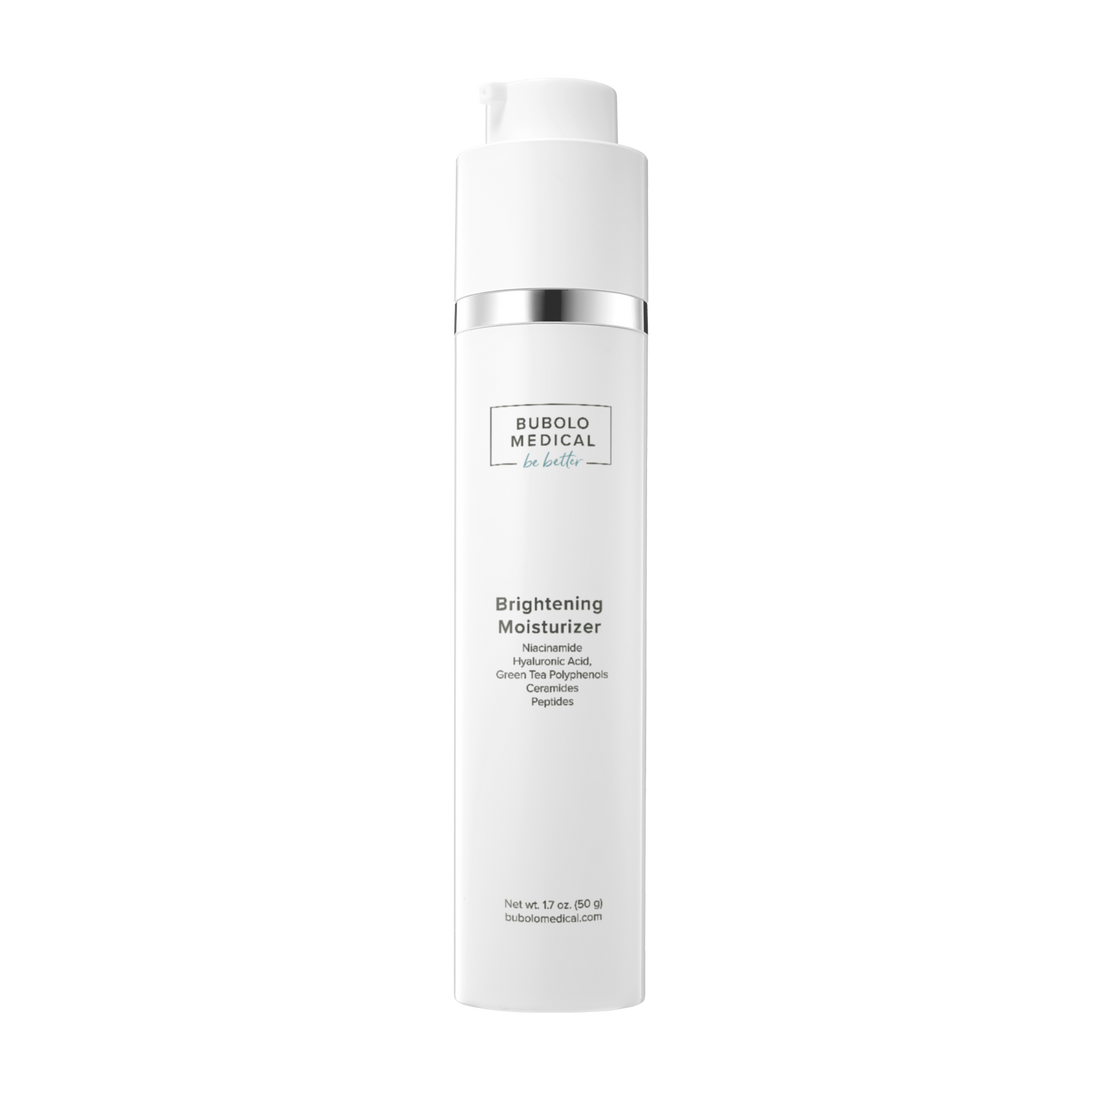 brightening moisturizer with niacinamide and hyaluronic acid for hydration and anti-aging care